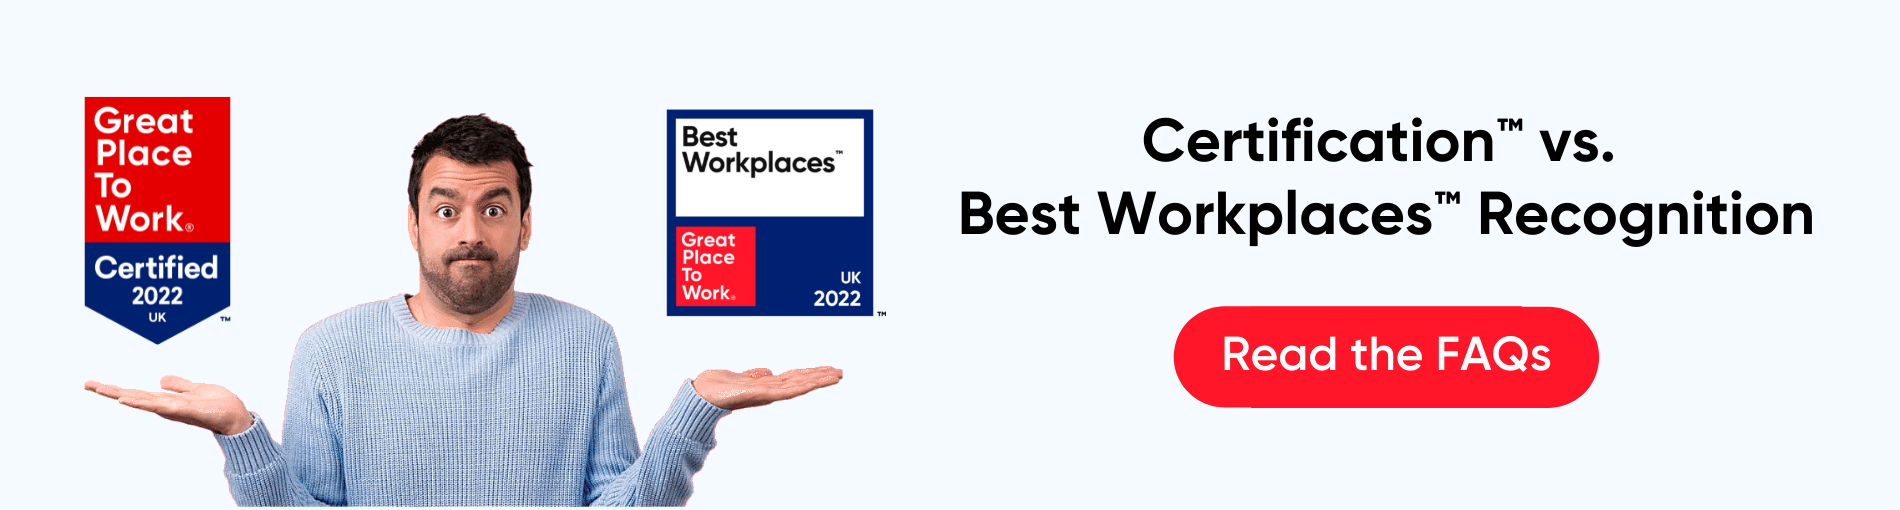 FAQs-certification-best-workplaces-2022-logos